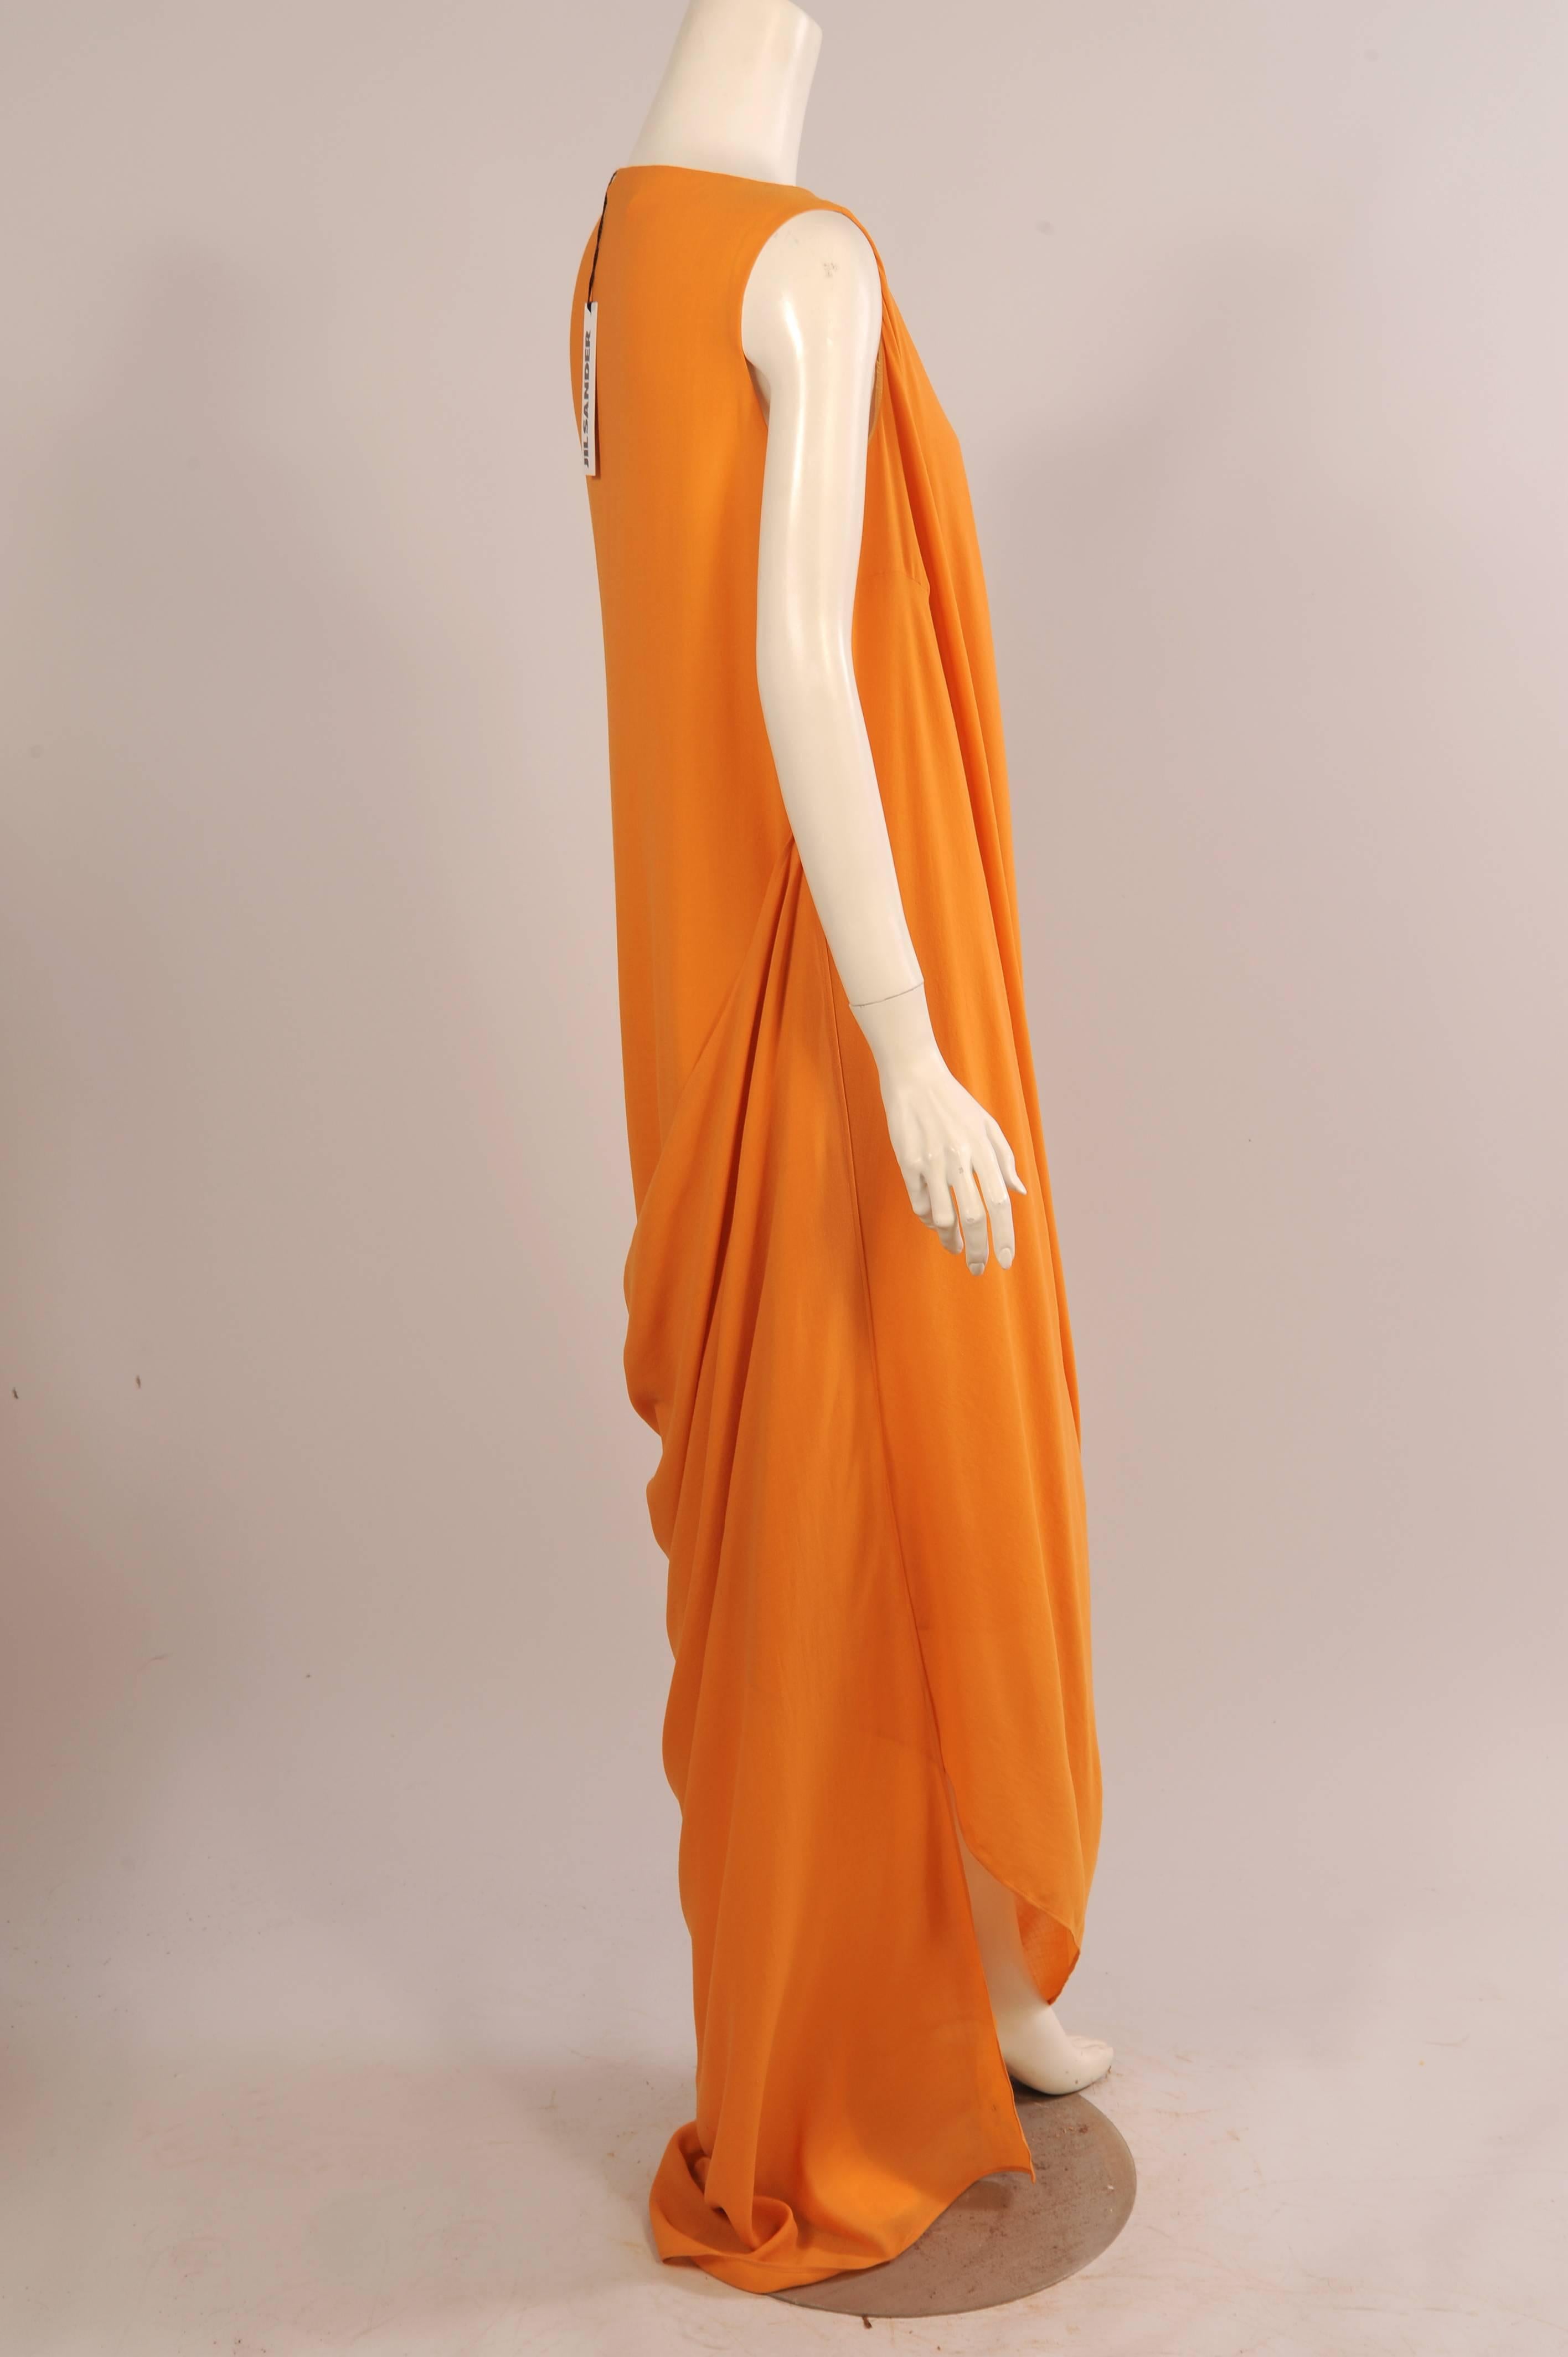 A classic knee length sleeveless sheath dress with a hidden left side zipper is transformed by a draped panel attached at the right shoulder seam. This follows the curve of the armhole and is attached all the way down to the hem of the dress on the